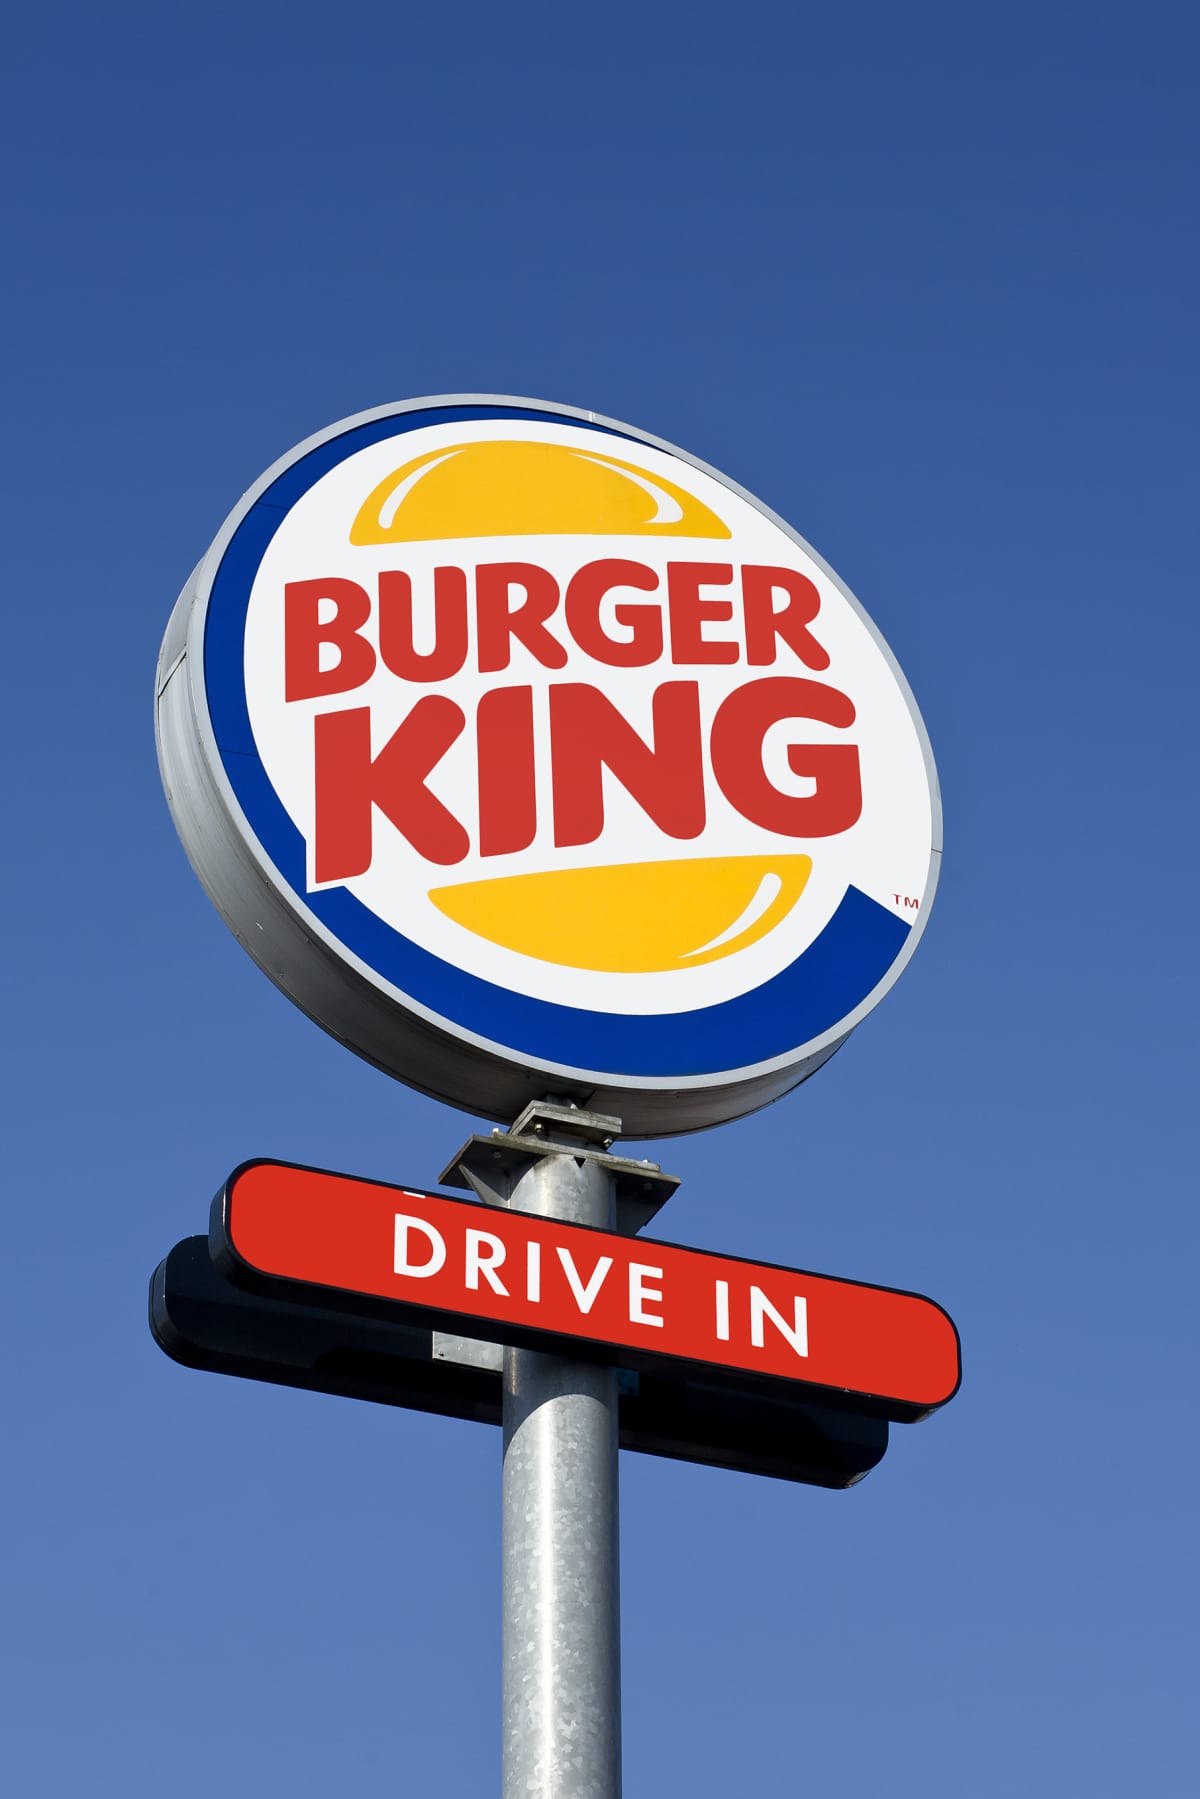 MADRID, SPAIN - APRIL 21: Burger King logo in a Burger King restaurant on April 18, 2021 in Madrid, Spain. (Photo by Cristina Arias/Cover/Getty Images)